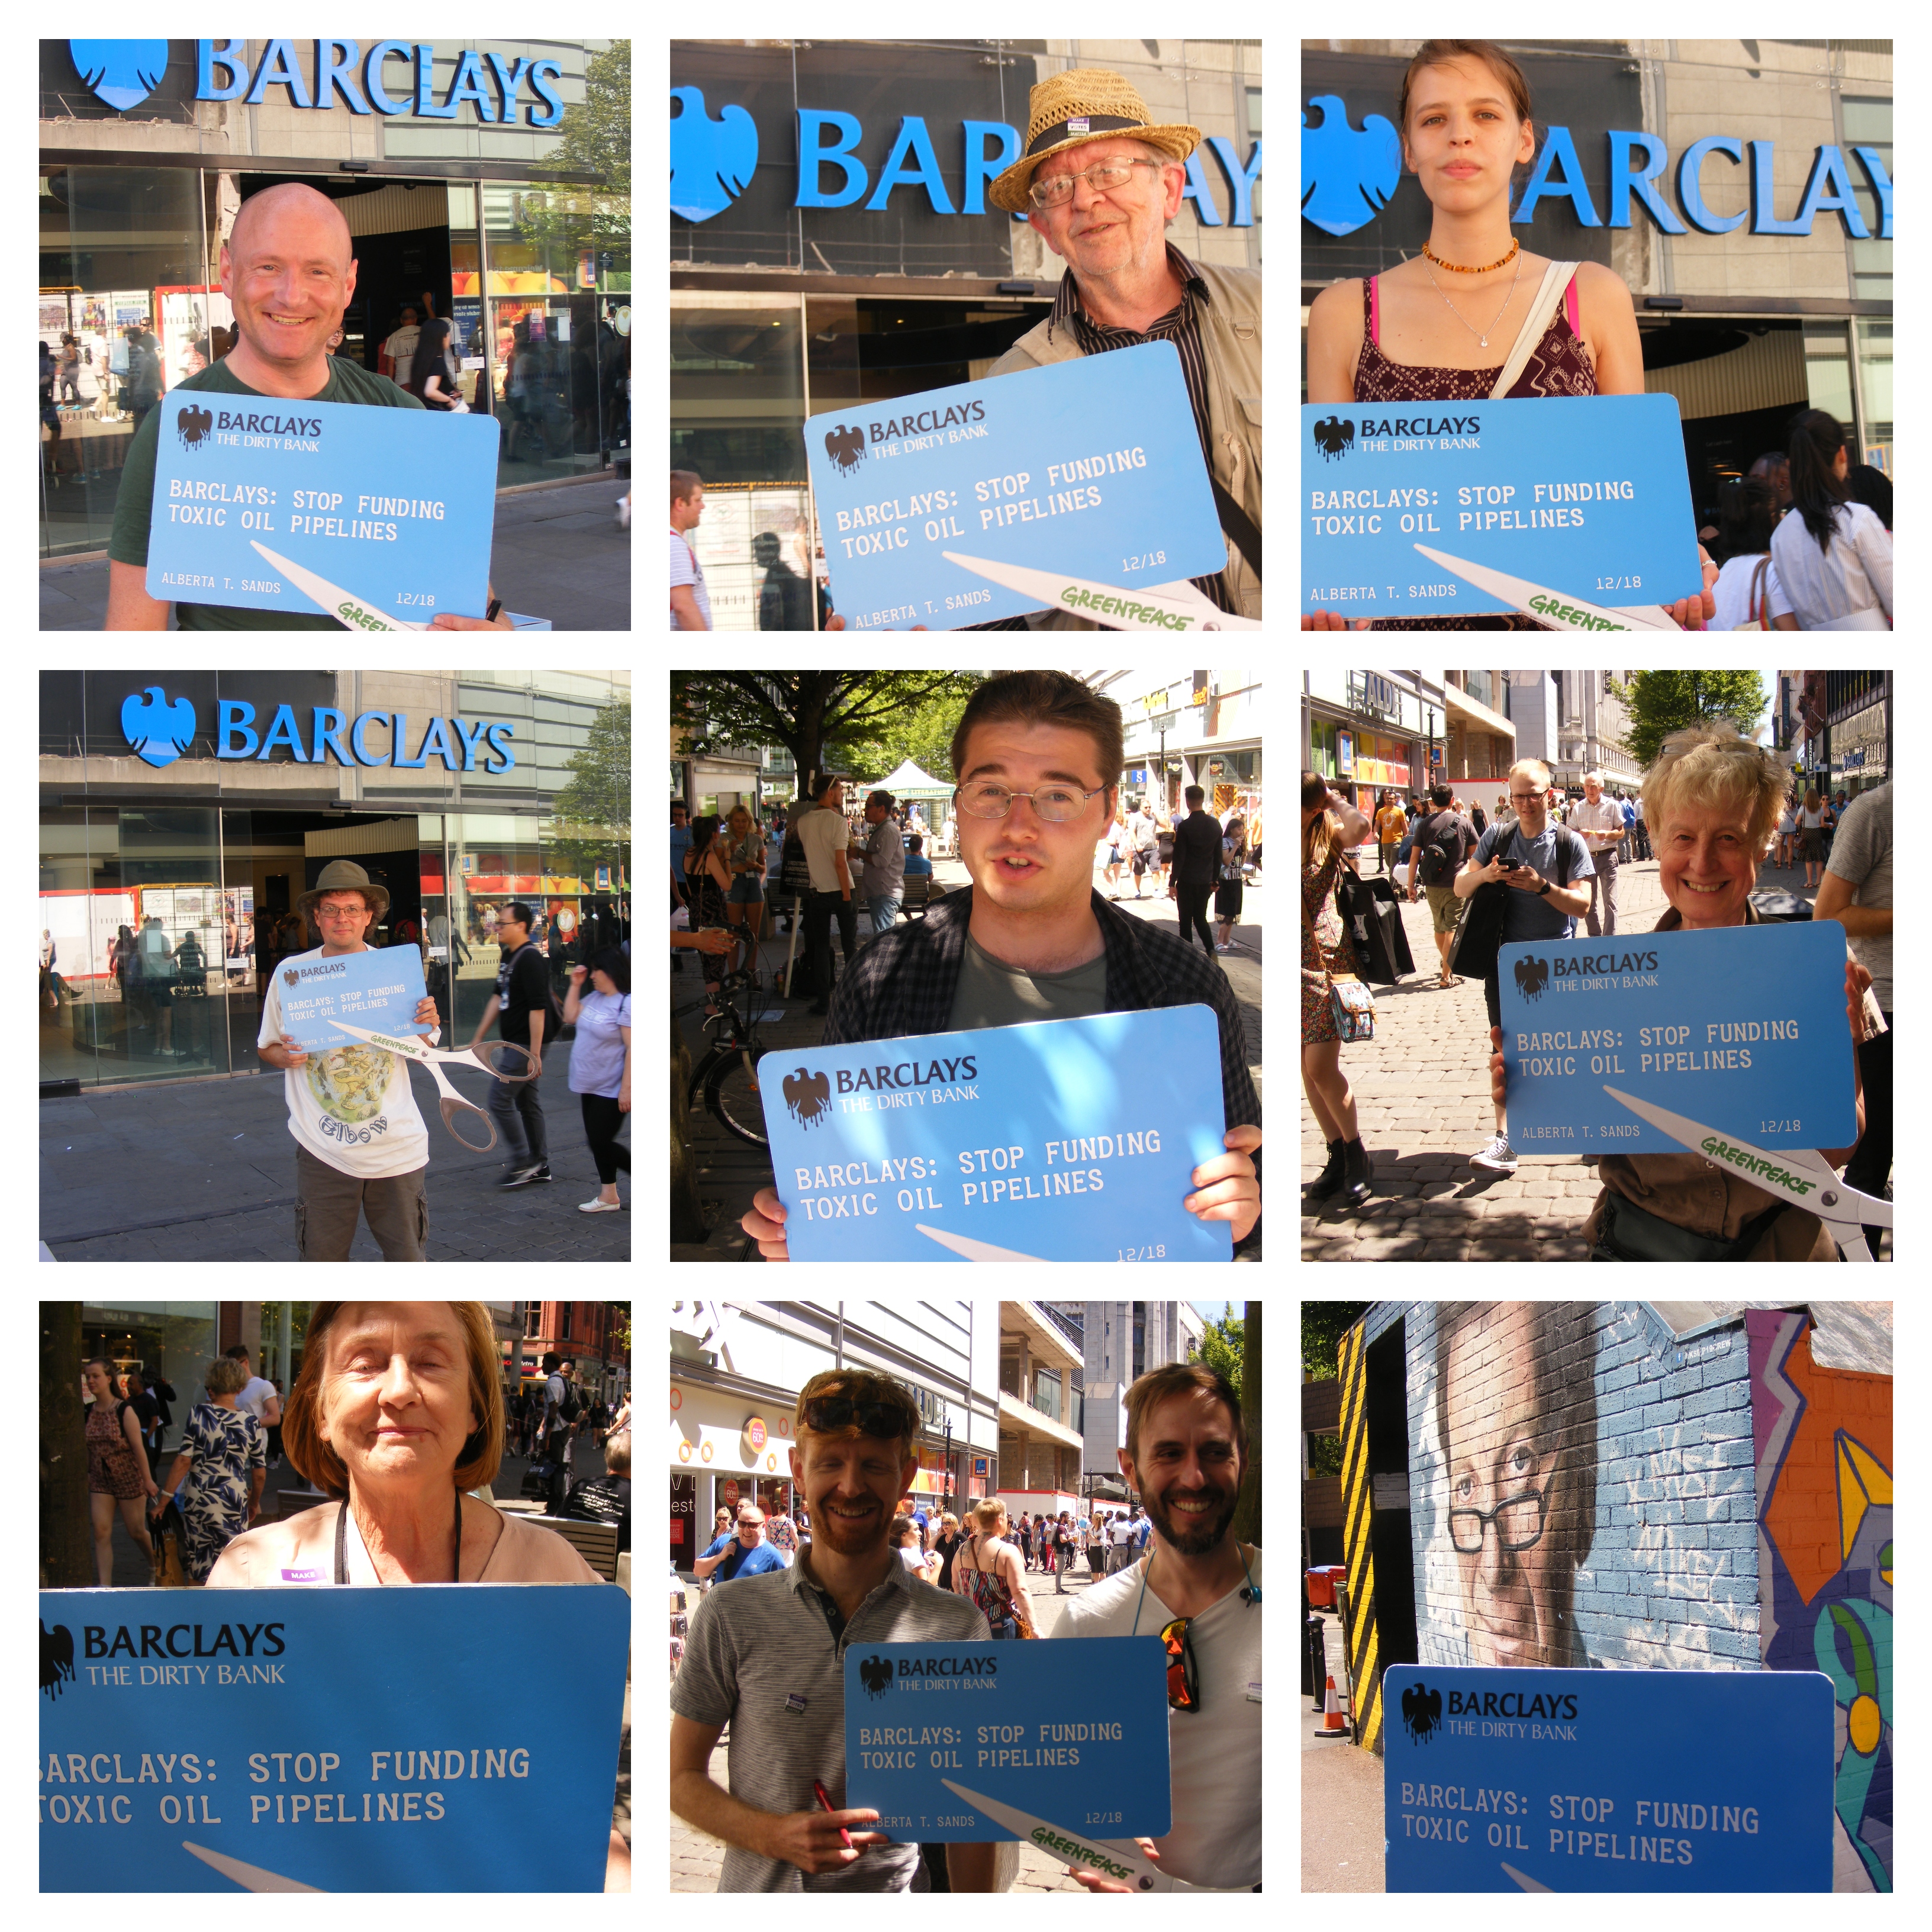 Image for Martin from Manchester – Why I’m standing up to Barclays